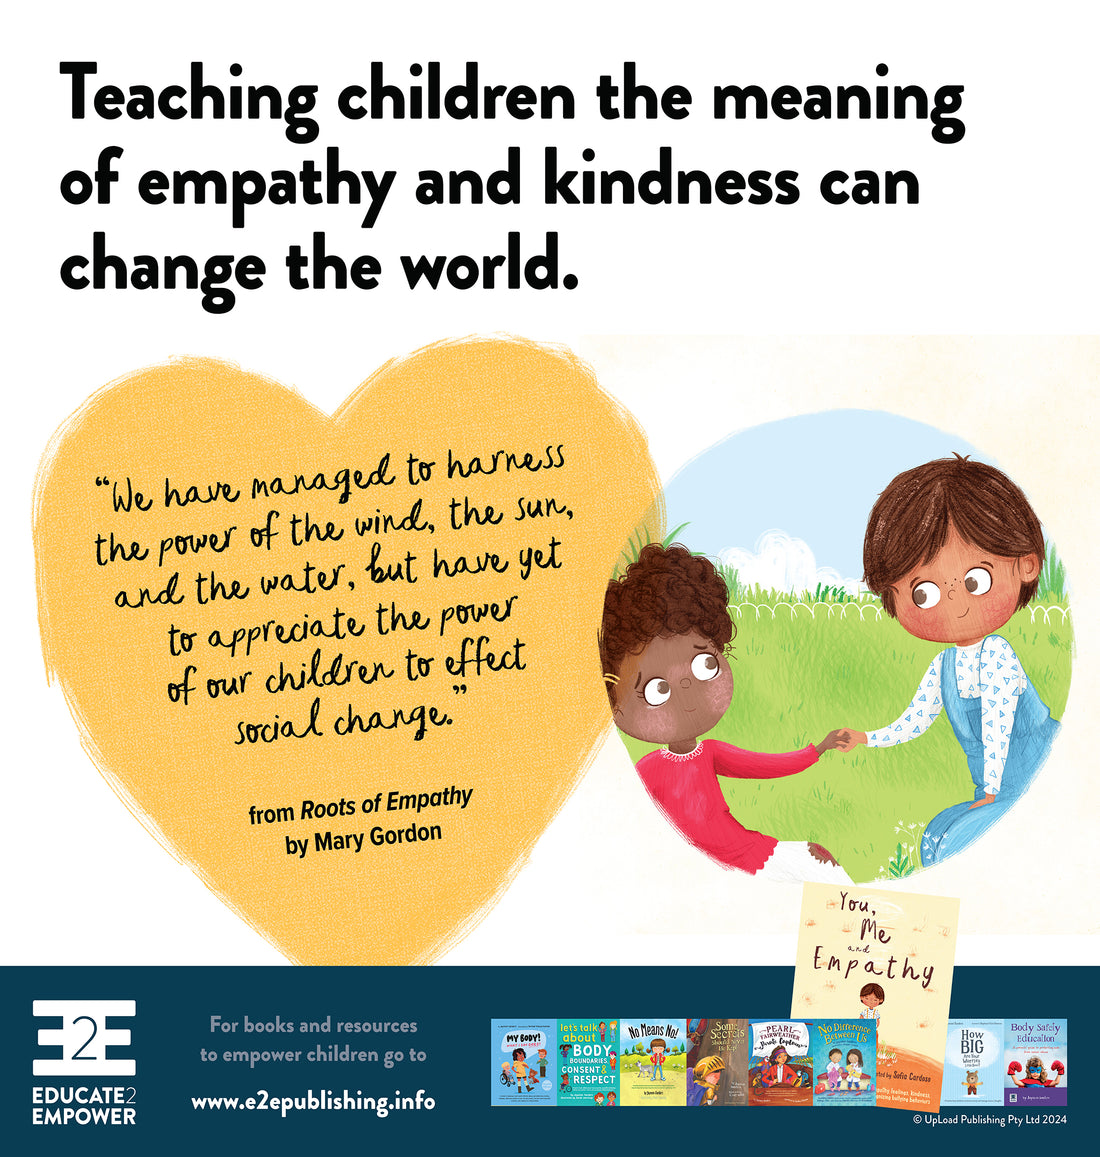 Teaching children the meaning of empathy and kindness can change the world.